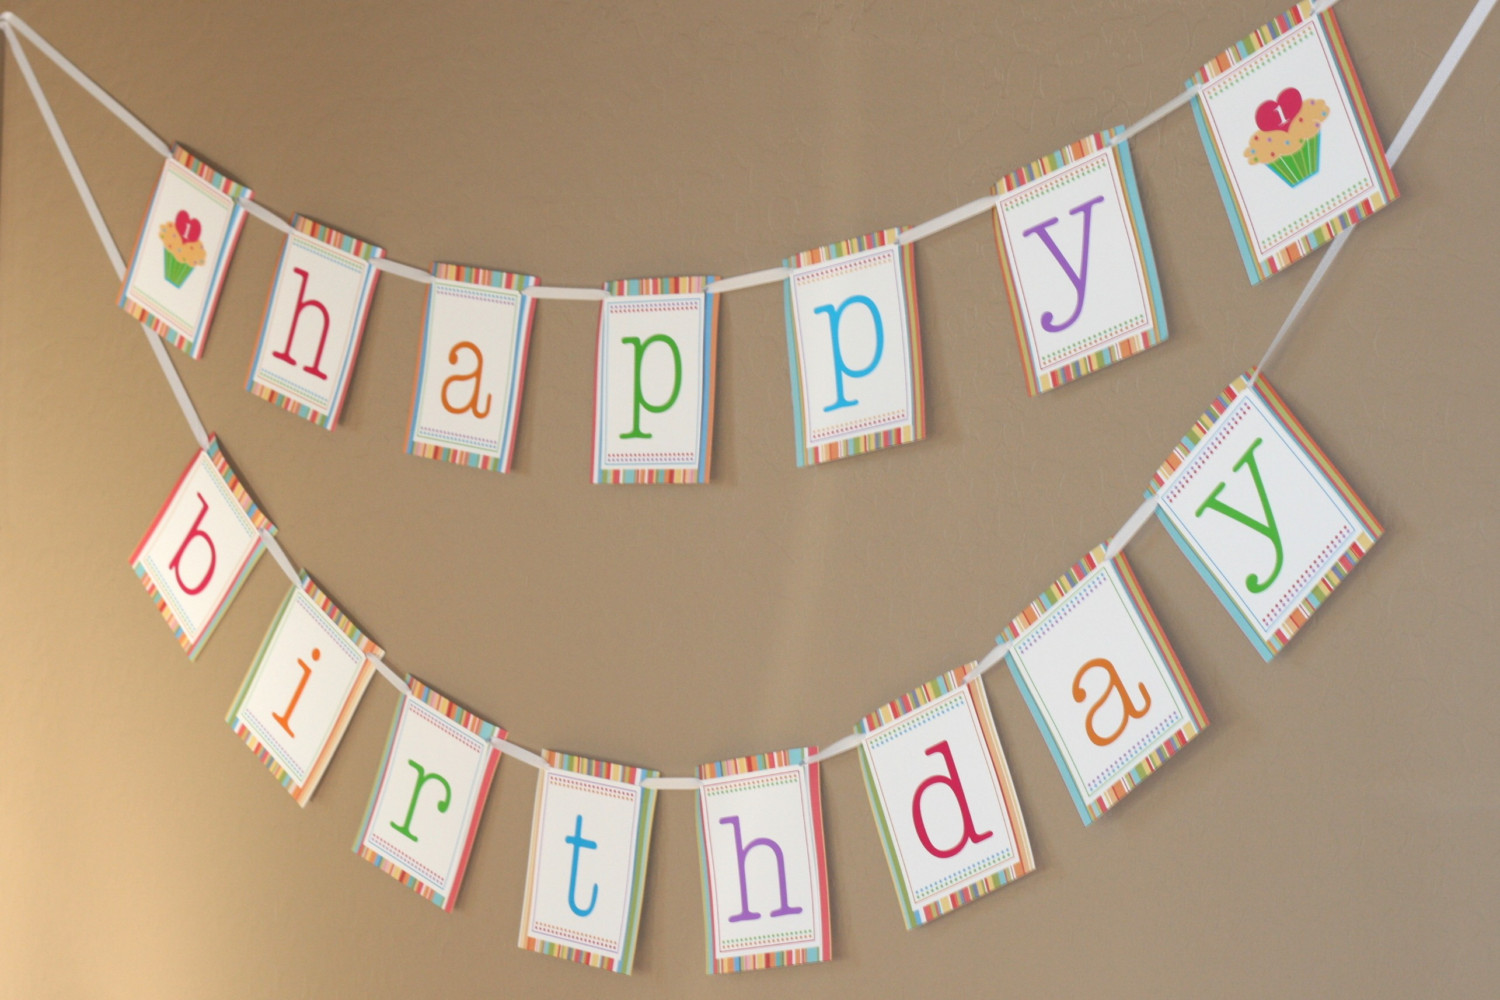 Free Printable Happy Birthday Banner Coloring Pages